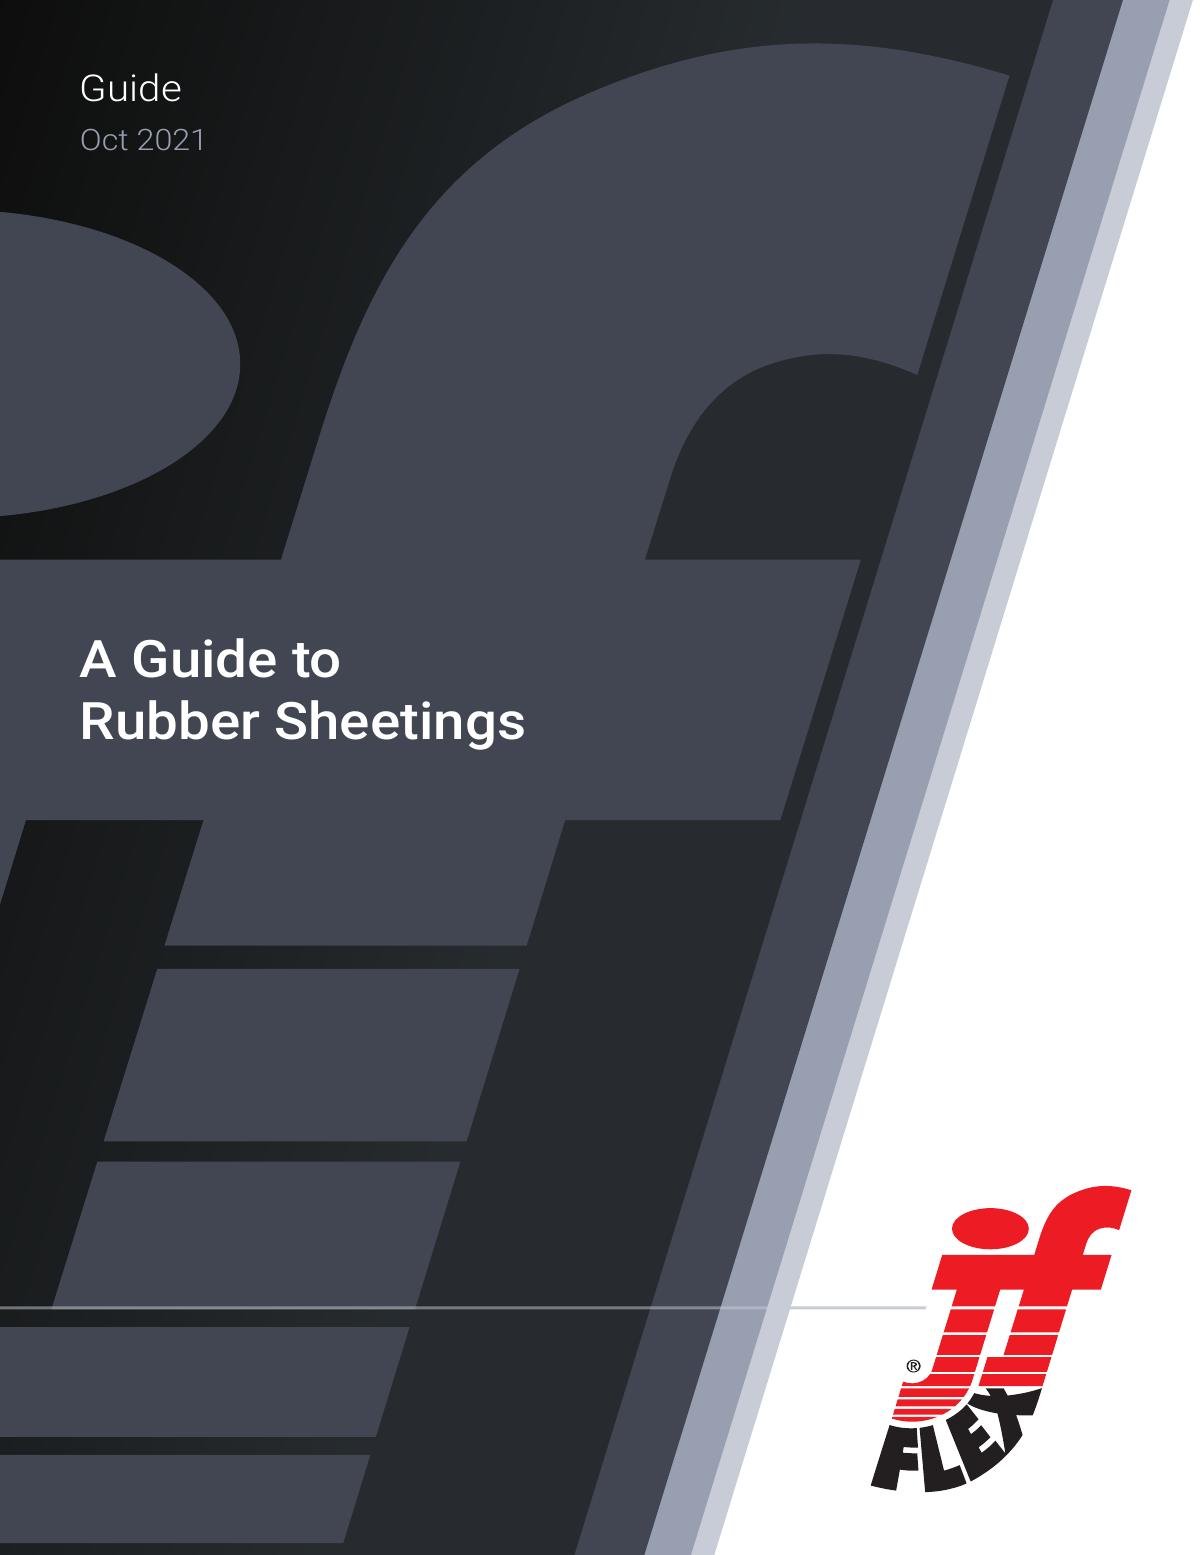 Guide to Rubber Sheetings